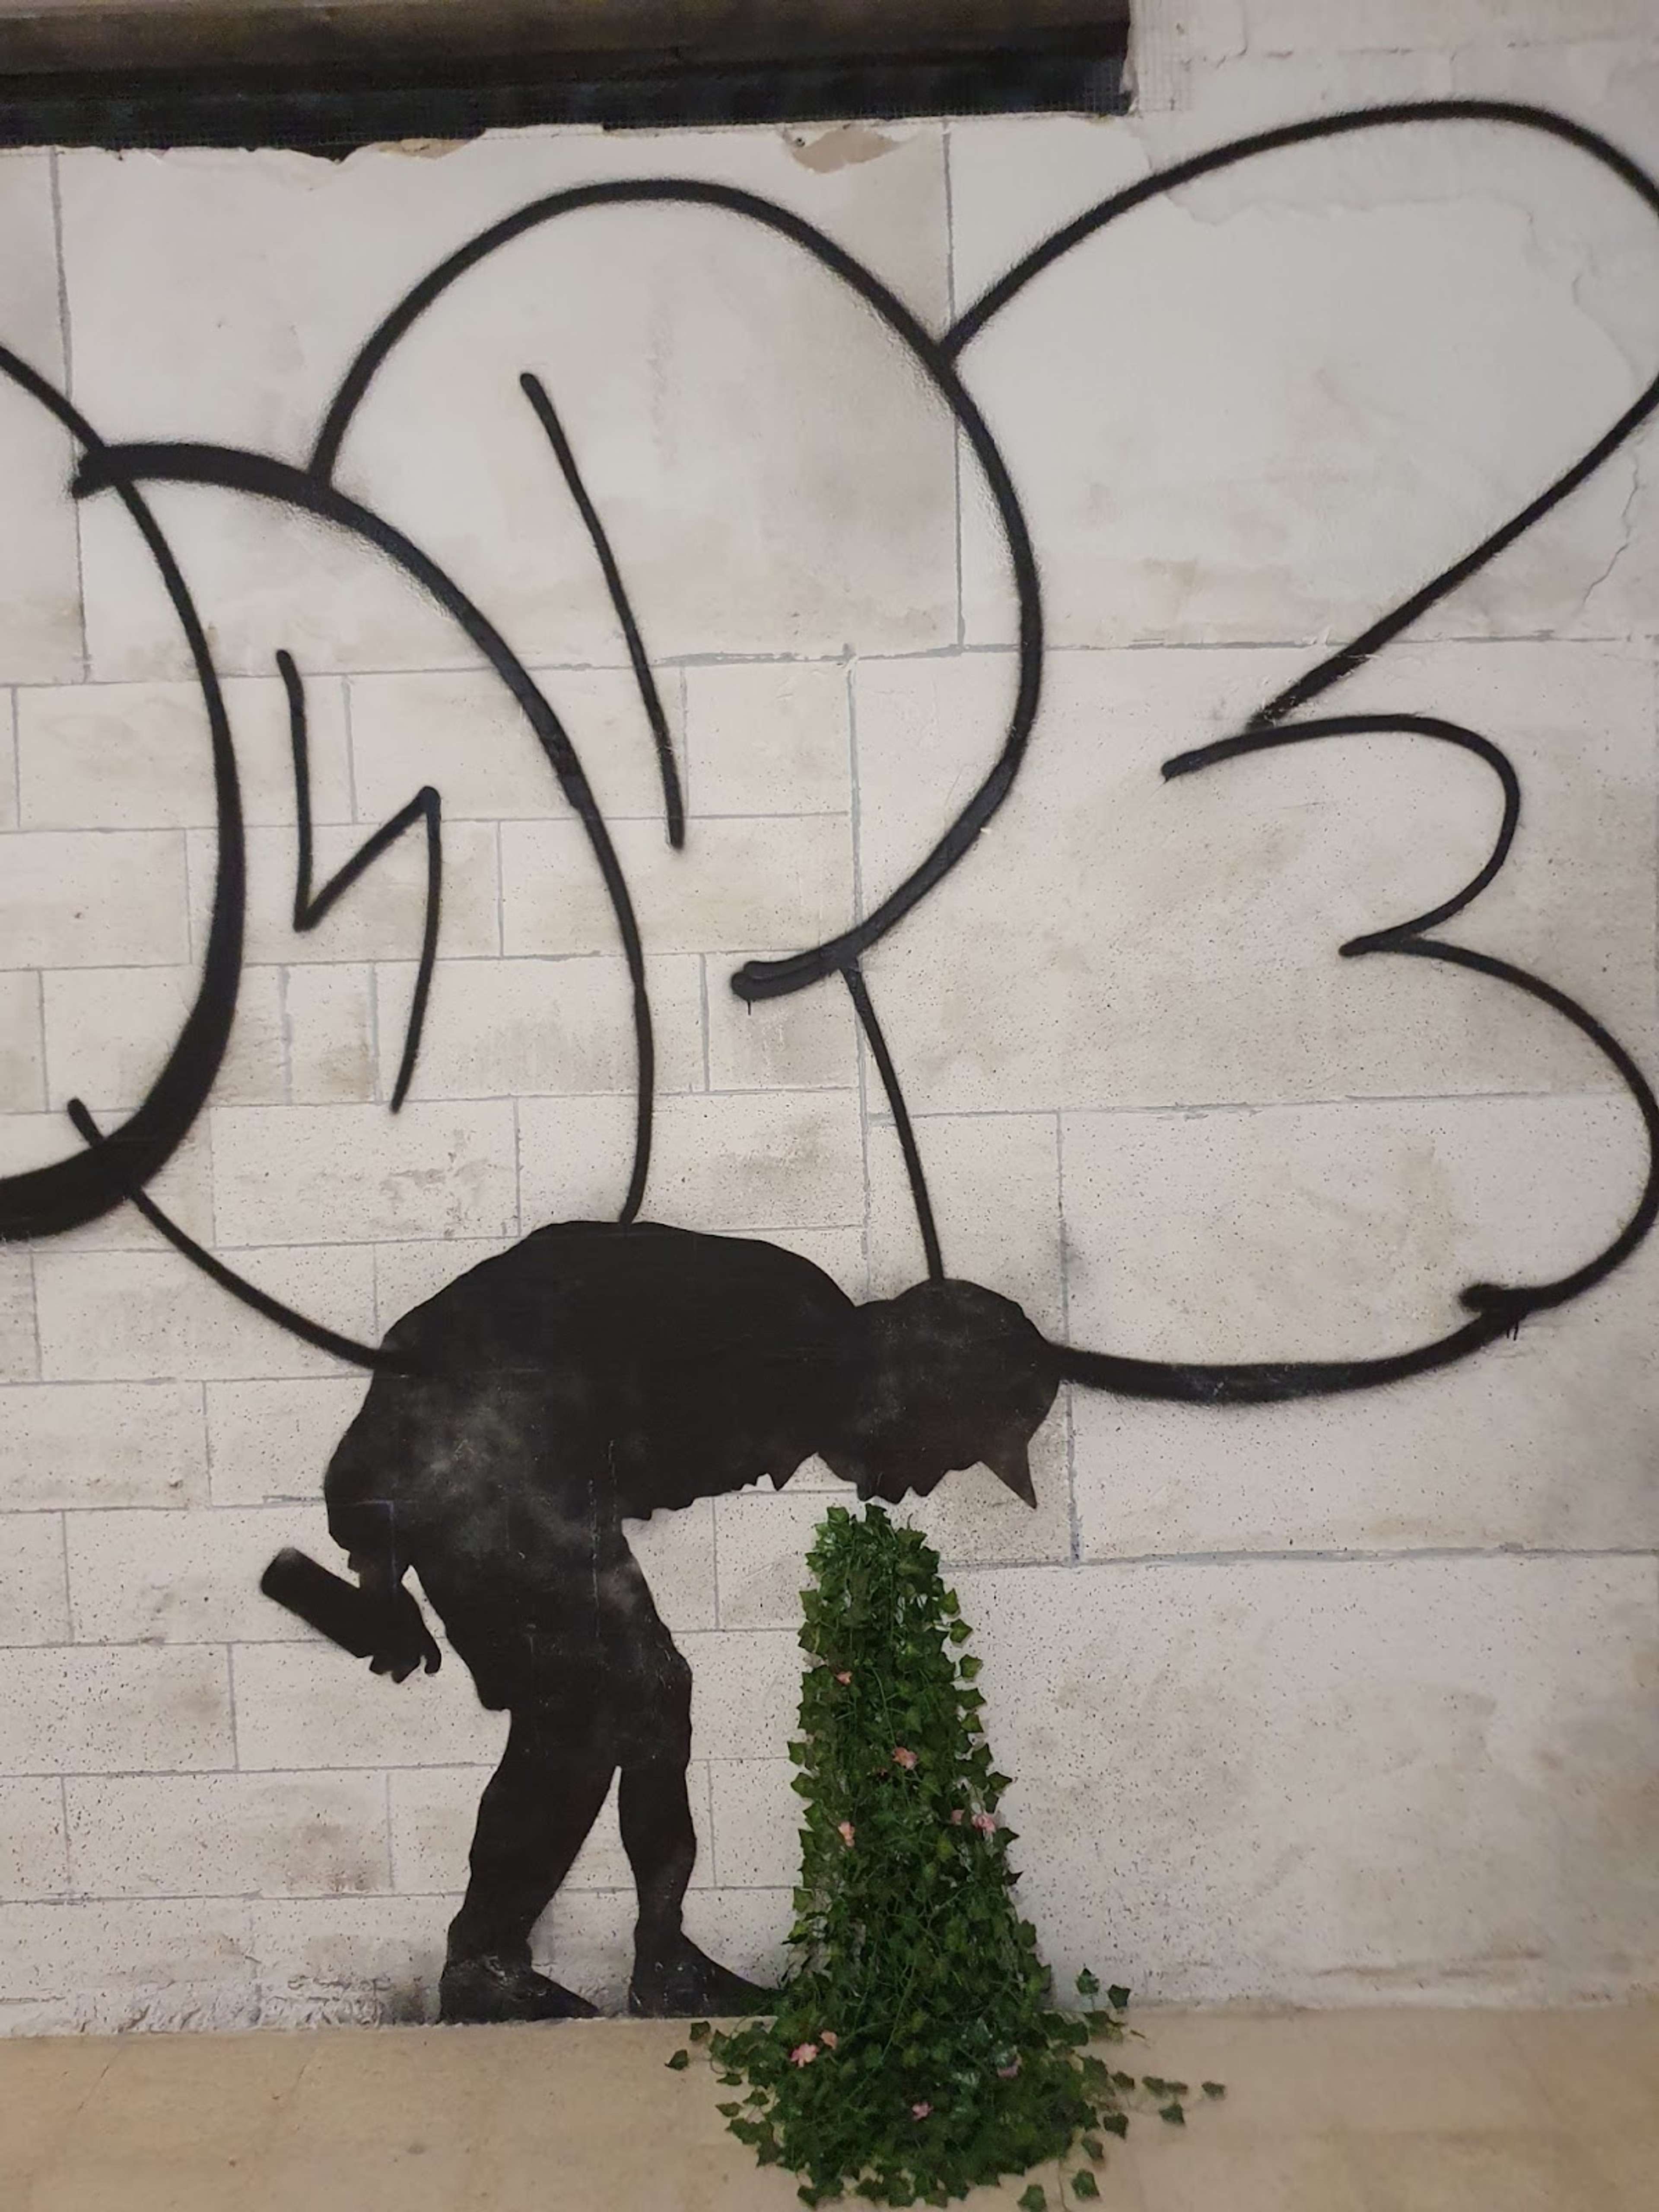 An image of the mural Better Out Than In by Banksy. It shows the silhouette of a young graffiti artist, holding a spray can and bent over, appearing to be vomiting an actual cluster of ivy.